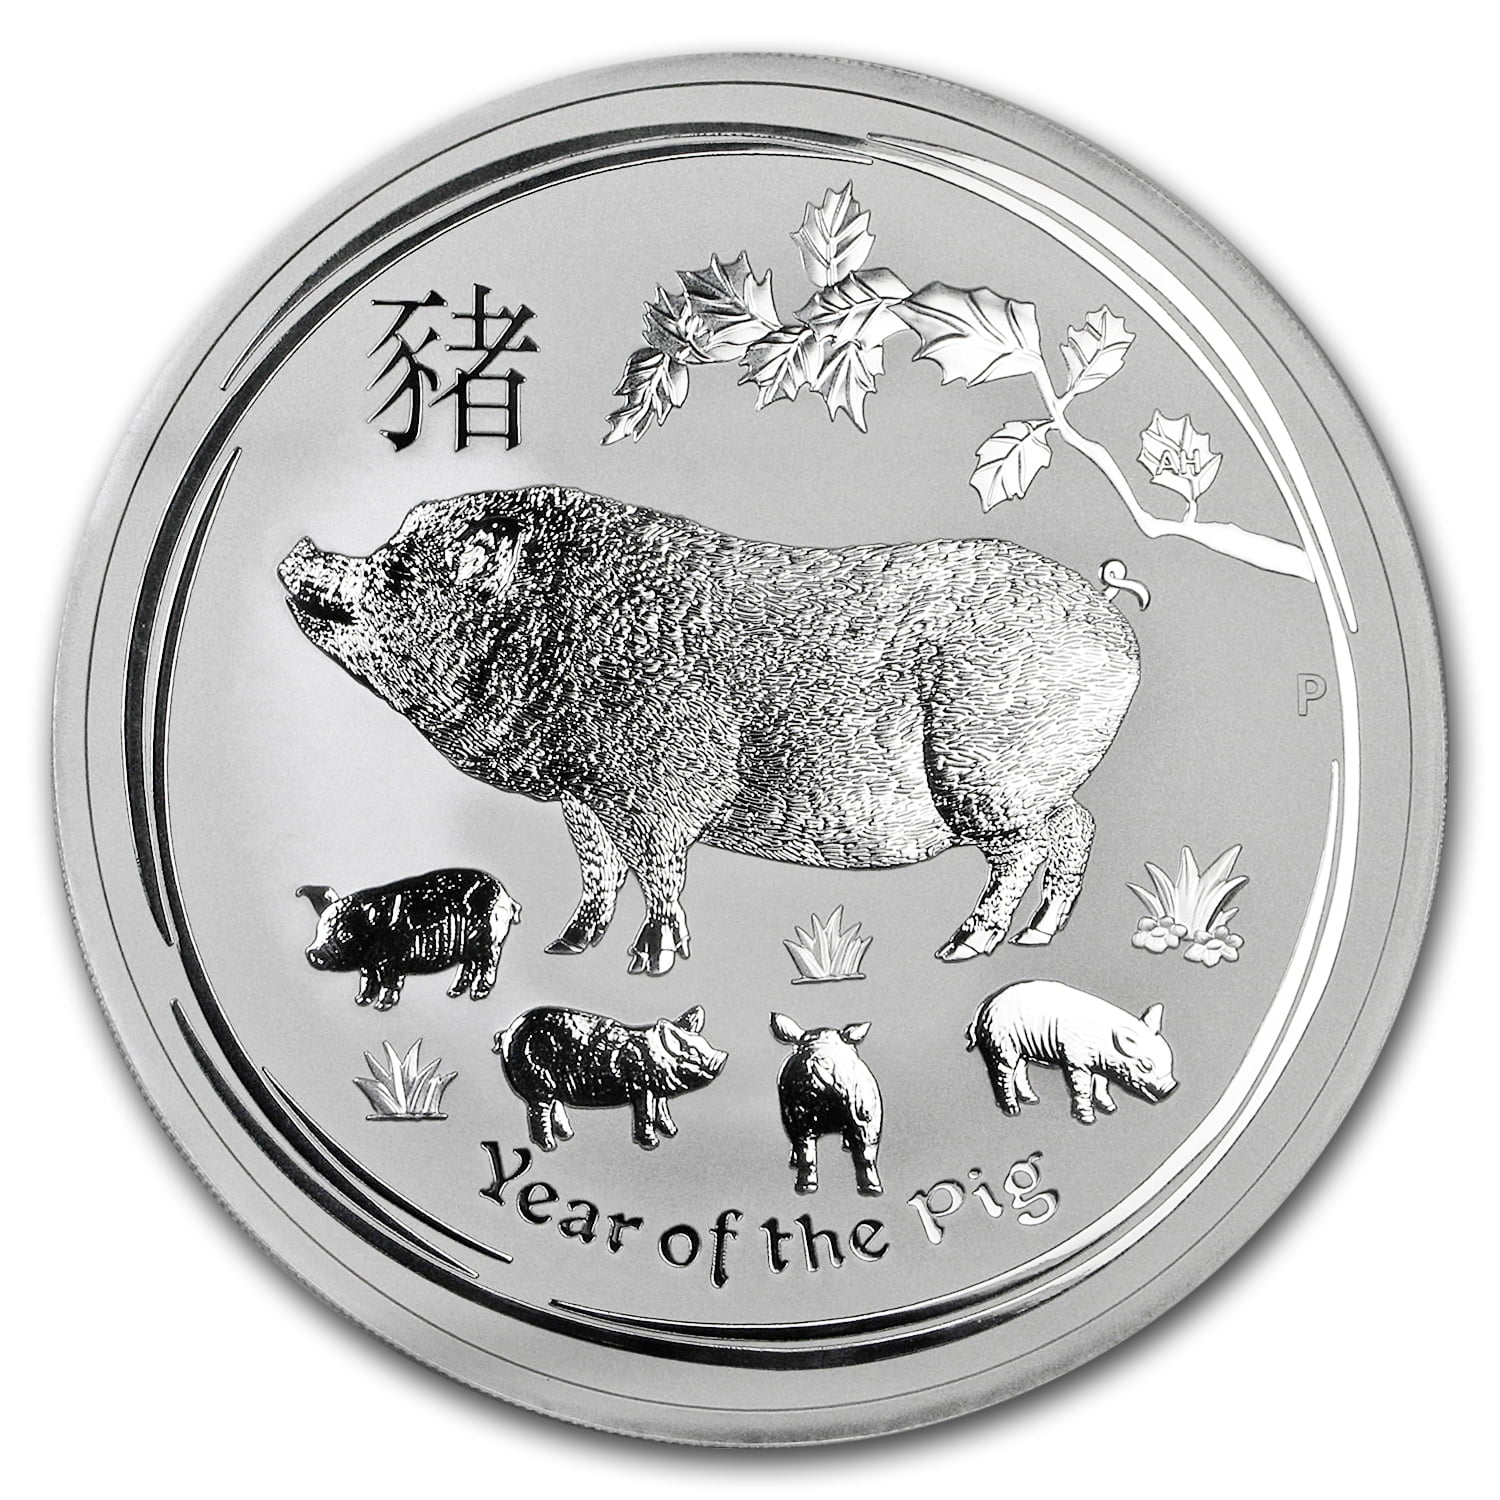 AUSTRALIAN LUNAR SERIES II 2019 YEAR OF THE PIG 1/2 OZ SILVER PROOF COIN 